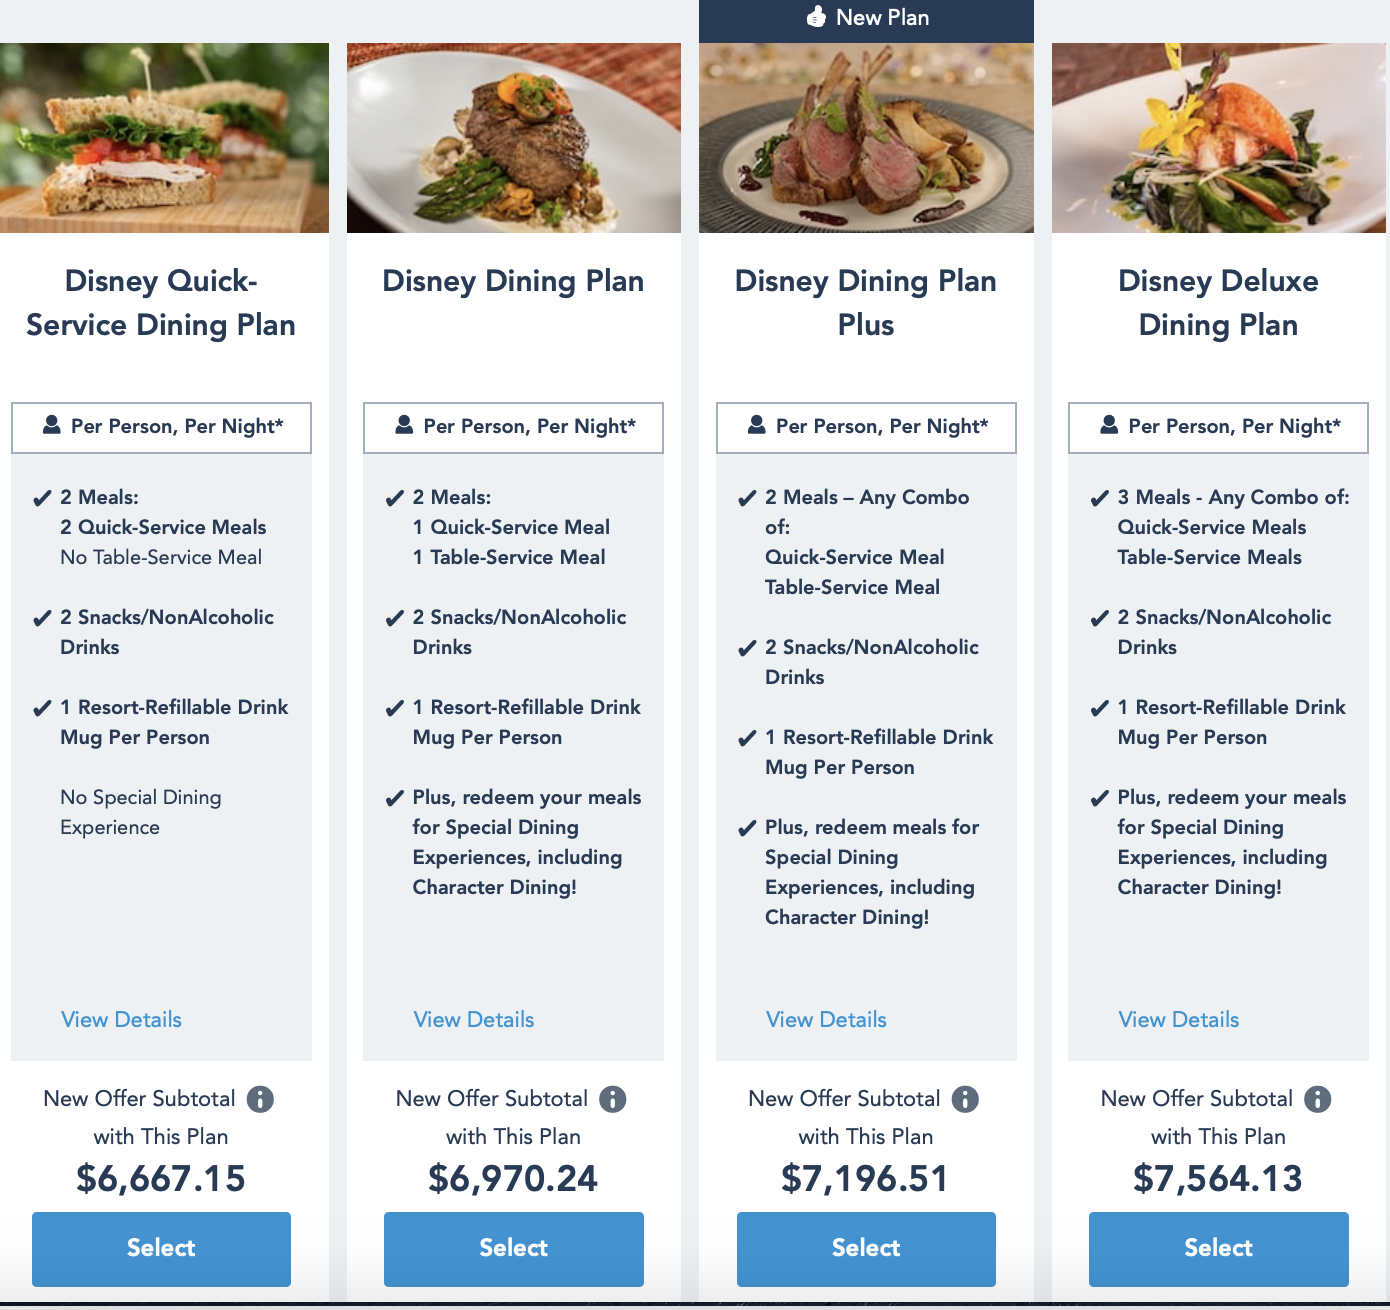 Disney's NEW Dining Plan Plus Option Is Now Available!